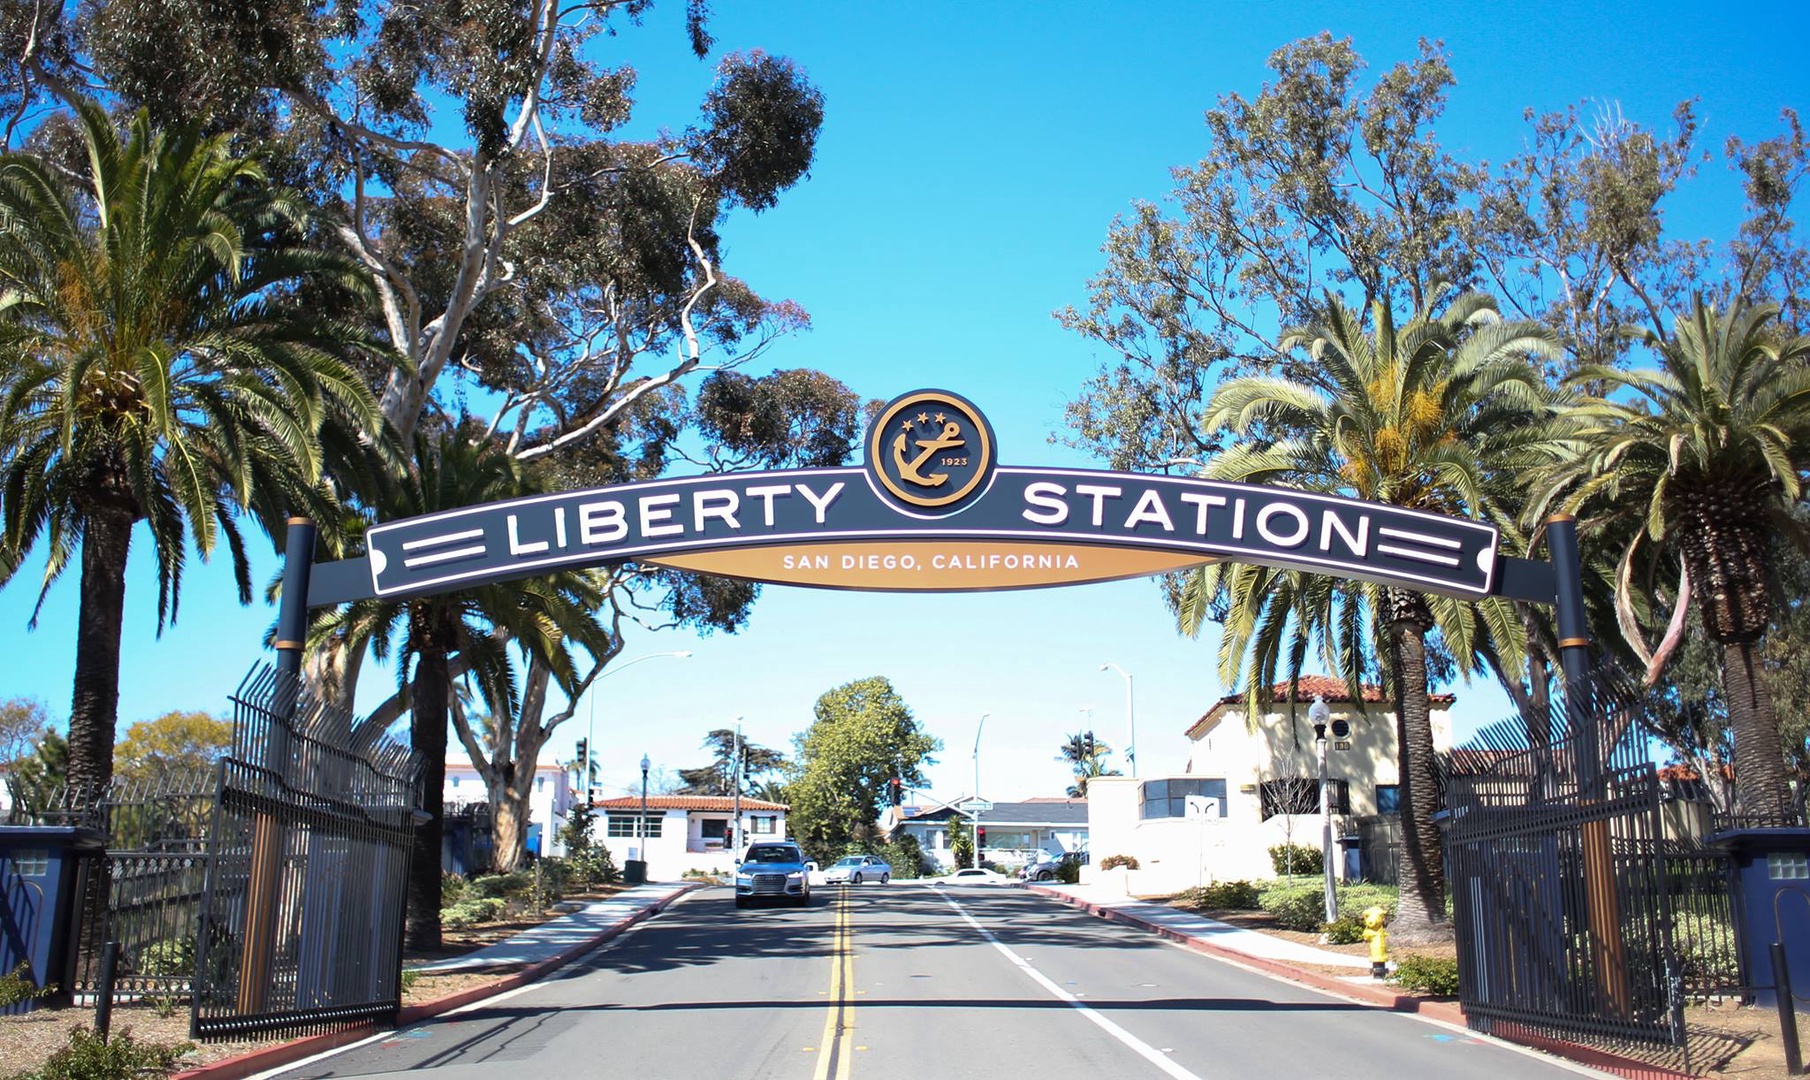 15 minute walk to Liberty Station - Dining, Shopping, and Entertainment hub of the peninsula